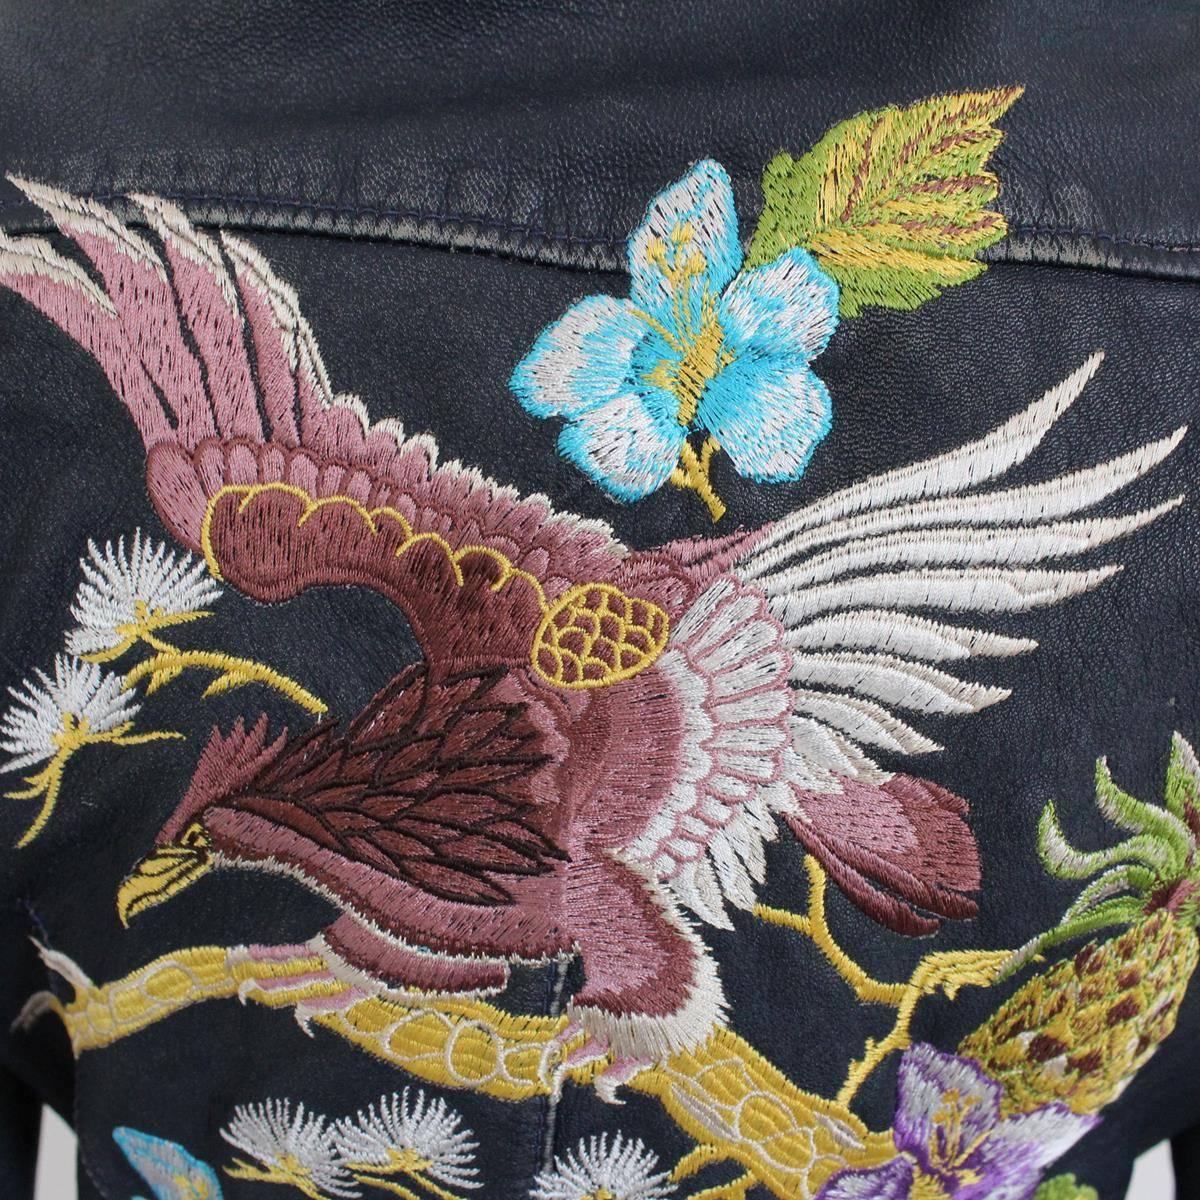 embroided leather